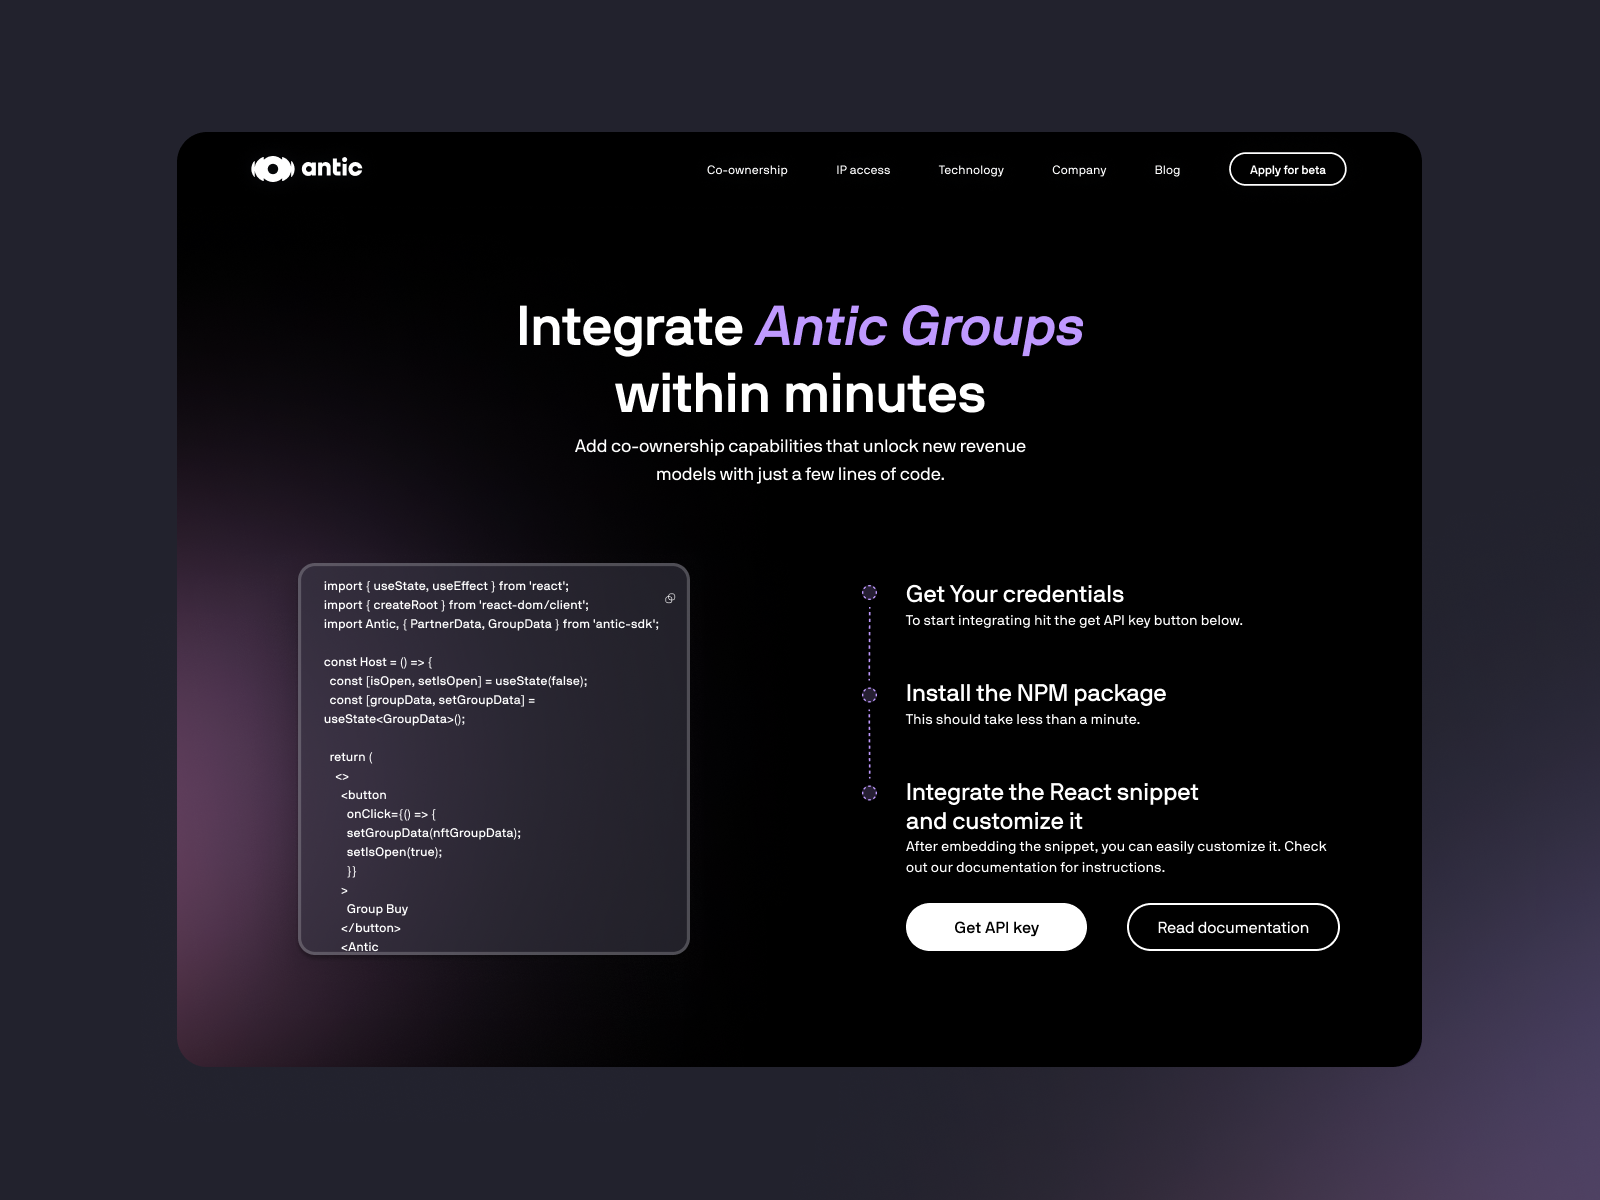 Integrate Antic Groups within minutes